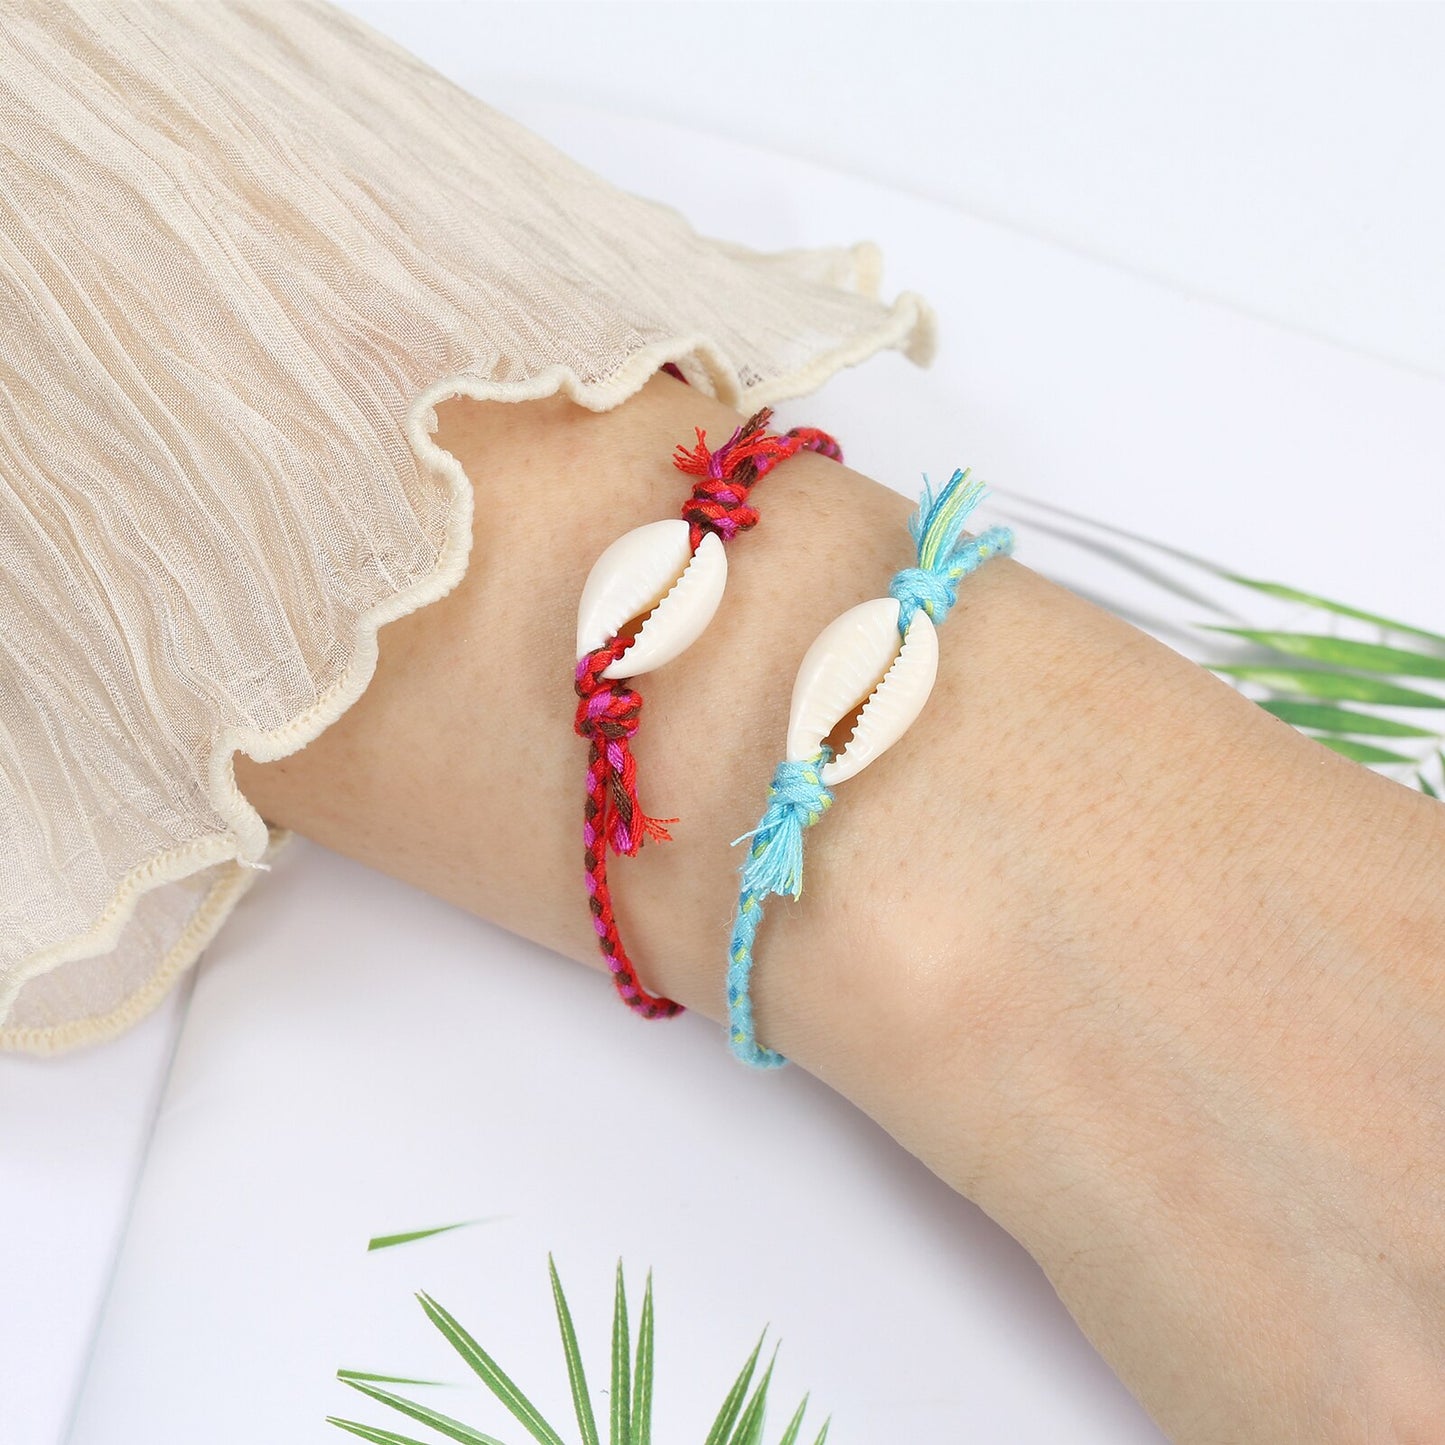 12Pcs Beach Shell Bracelets Anklets Set for Women Girls Summer Handmade Braided Thick Rope Tassel Chain Jewelry Wholesale